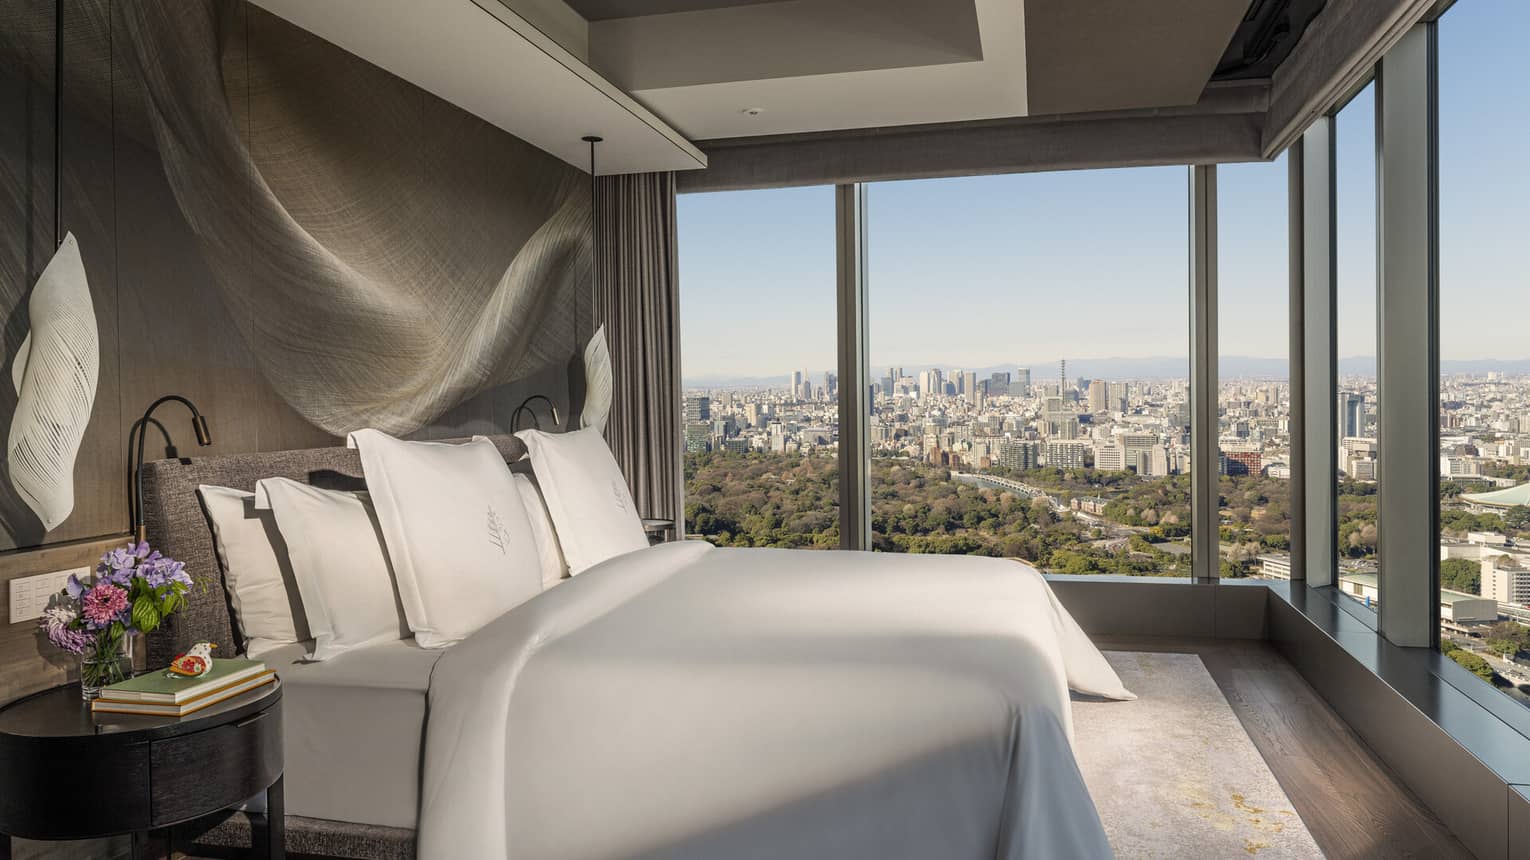 A gray upholstered bed, wooden night stand and modern light fixture in a room with stunning city views